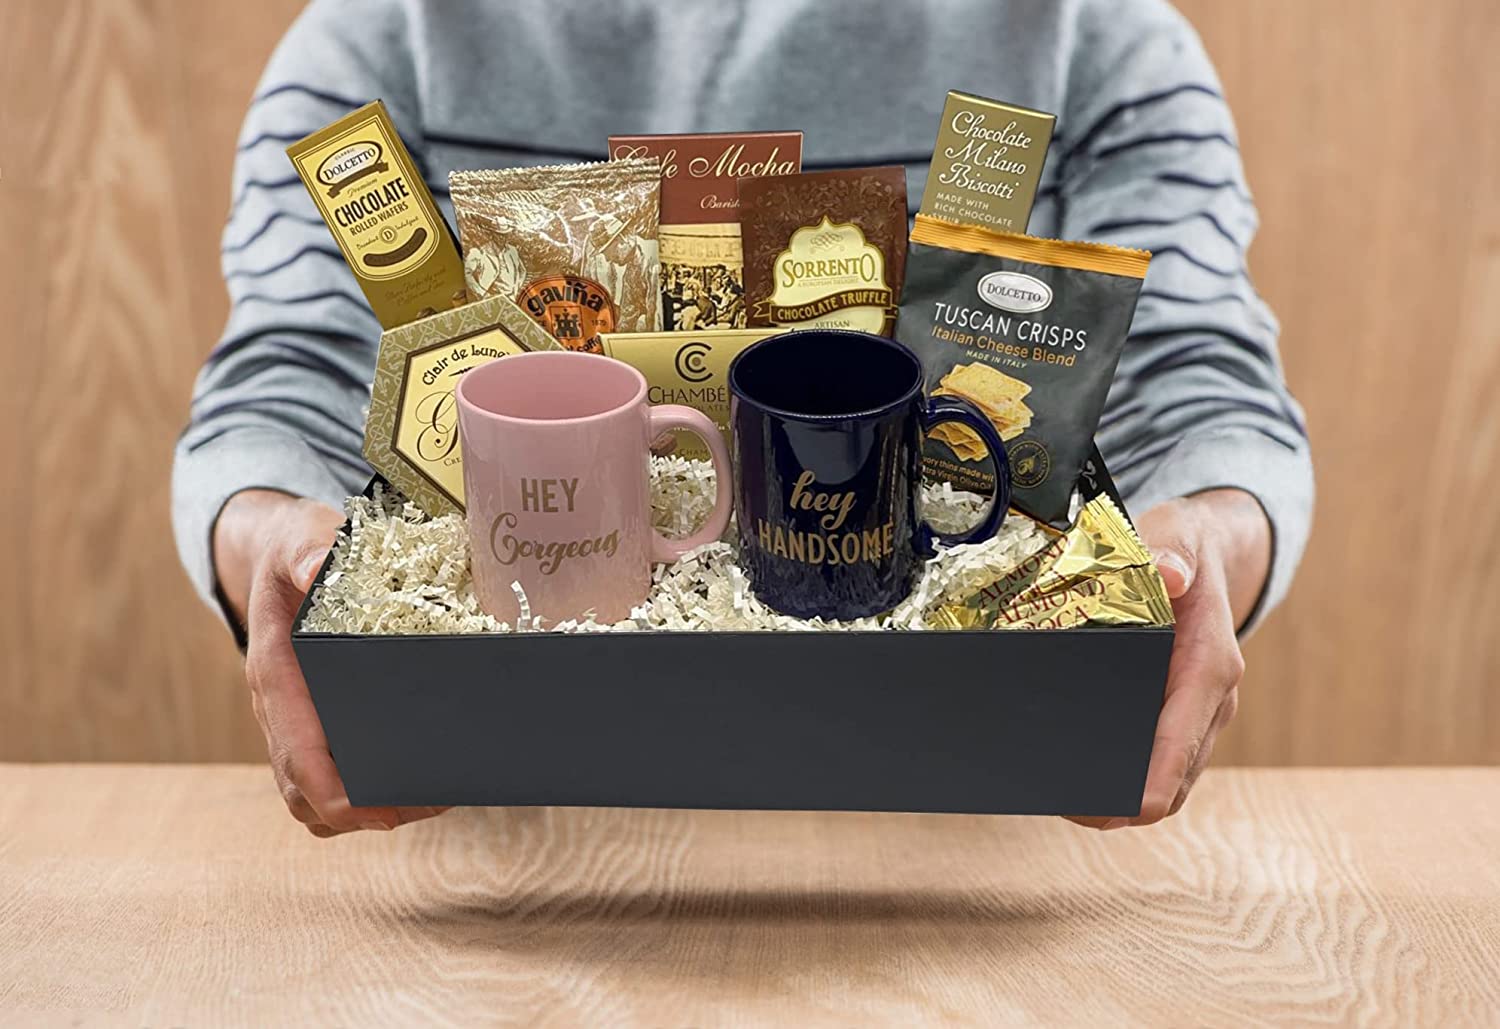 Coffee Gift Baskets - Hot Cocoa Gift - Food Gift - Valentines Coffee Gift Box- 2 Mugs, Wafers, Hot Cocoa, Coffee, Snacks and More (warm and Cozy)